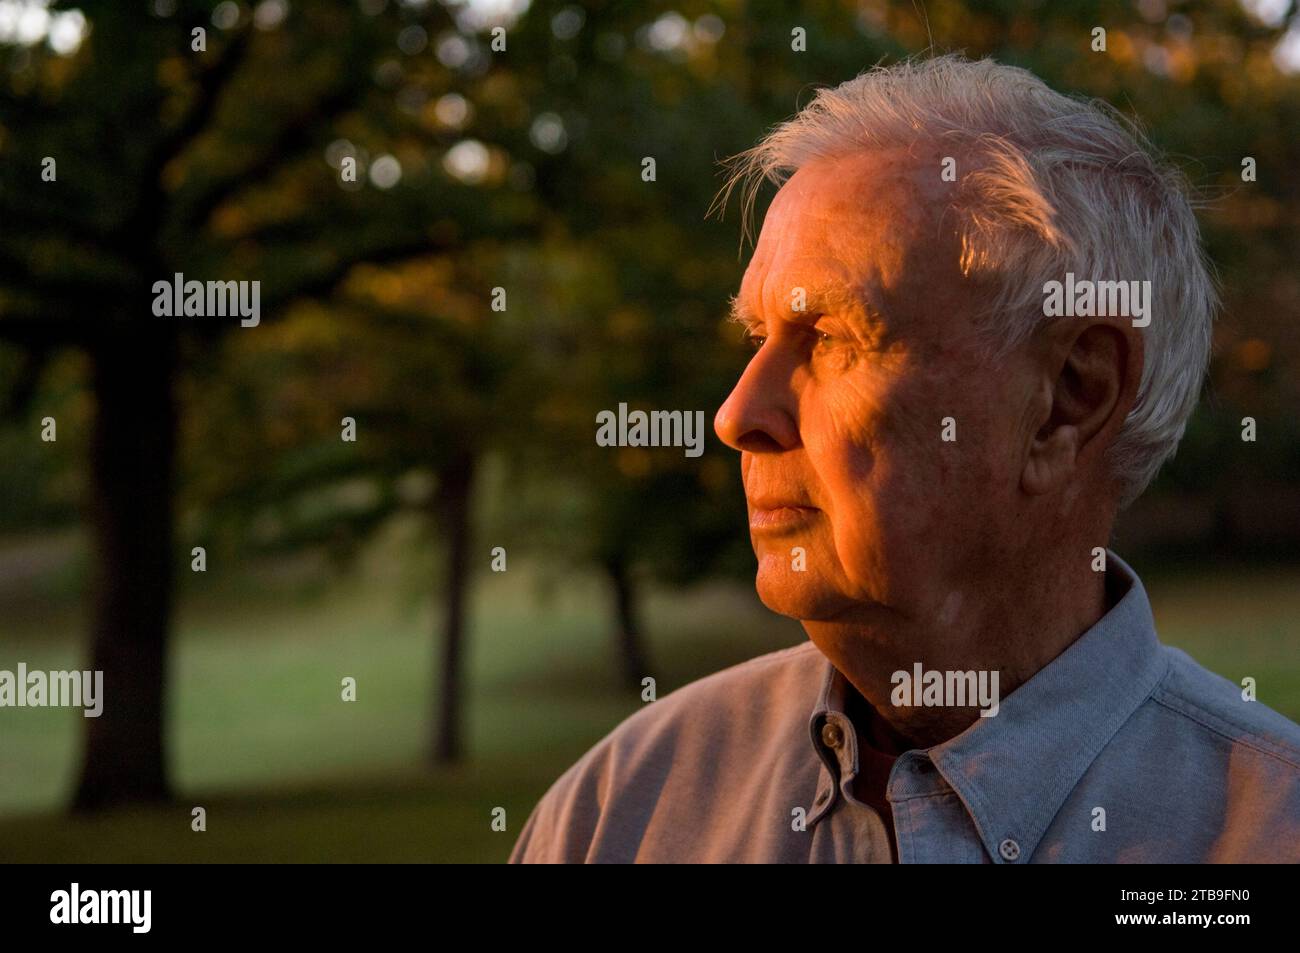 Outdoor portrait of a man in sunset light; Tulsa, Oklahoma, United States of America Stock Photo